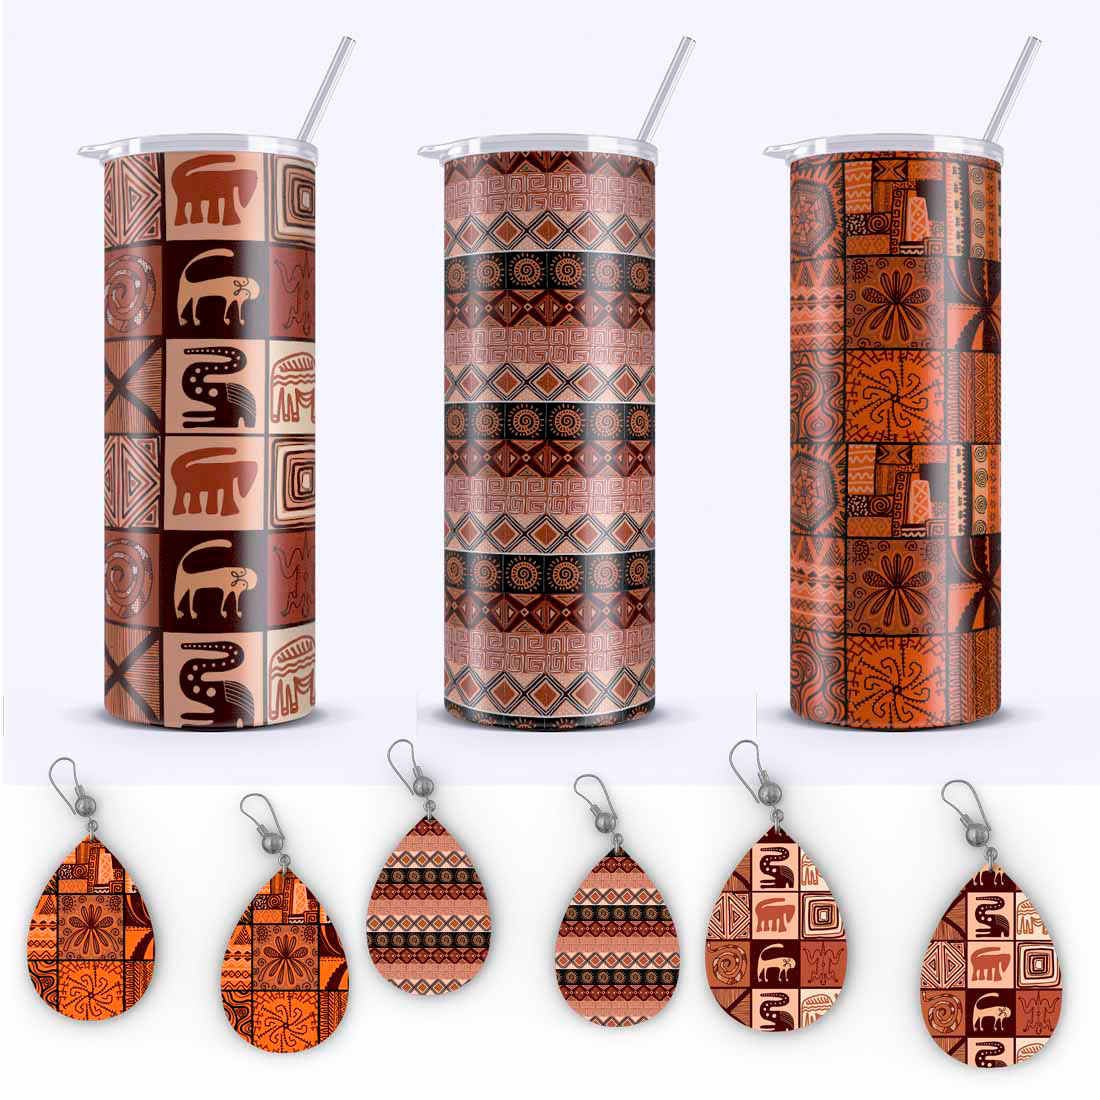 Image of crockery and earring with magnificent patterns in African style.